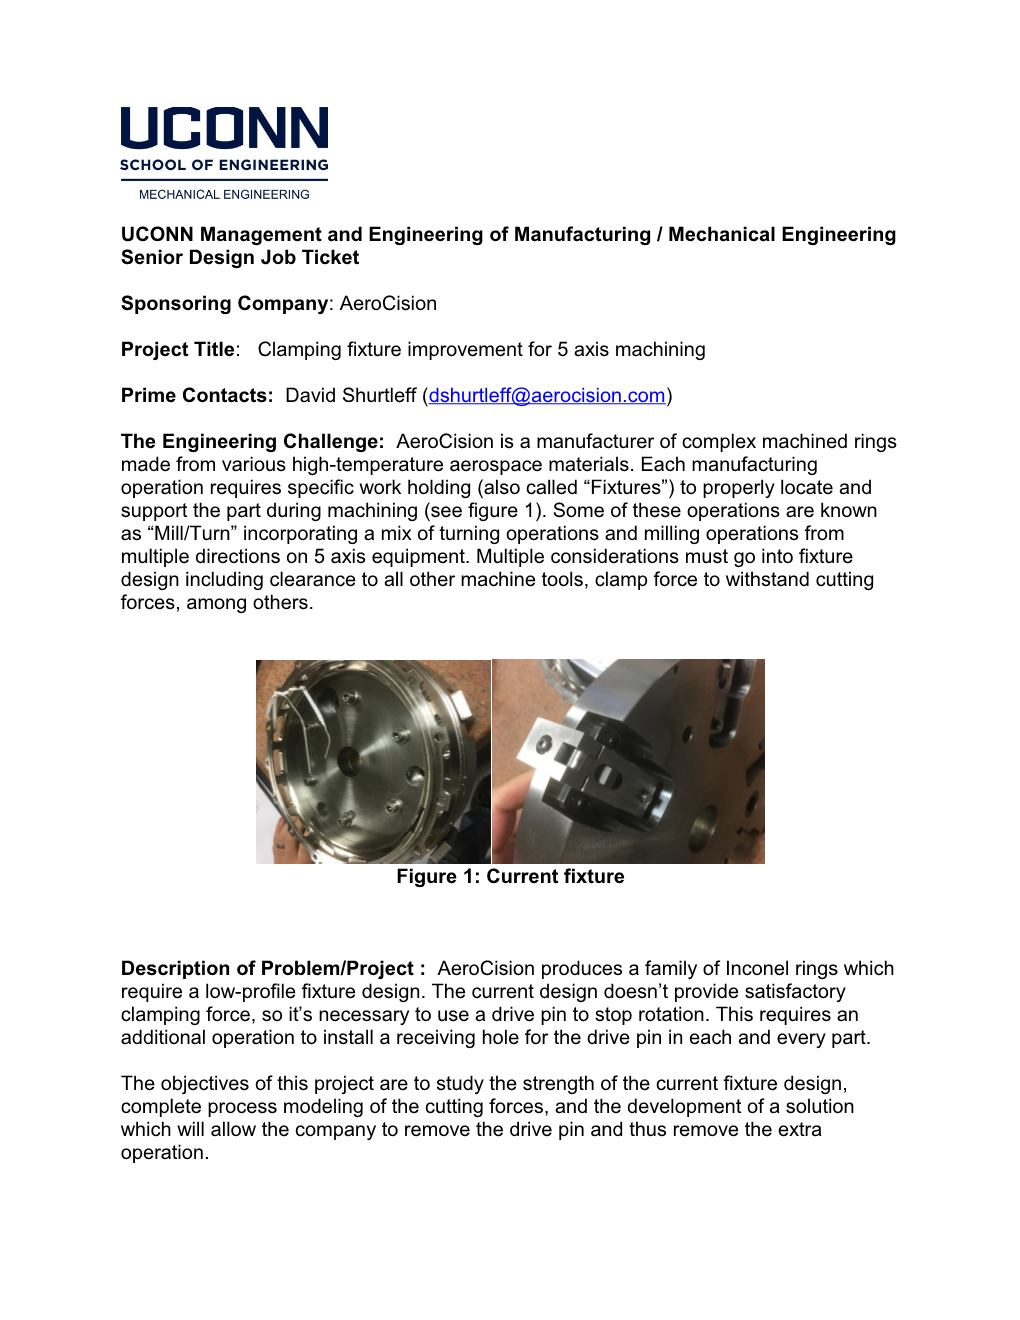 UCONN Management and Engineering of Manufacturing / Mechanical Engineering Senior Design